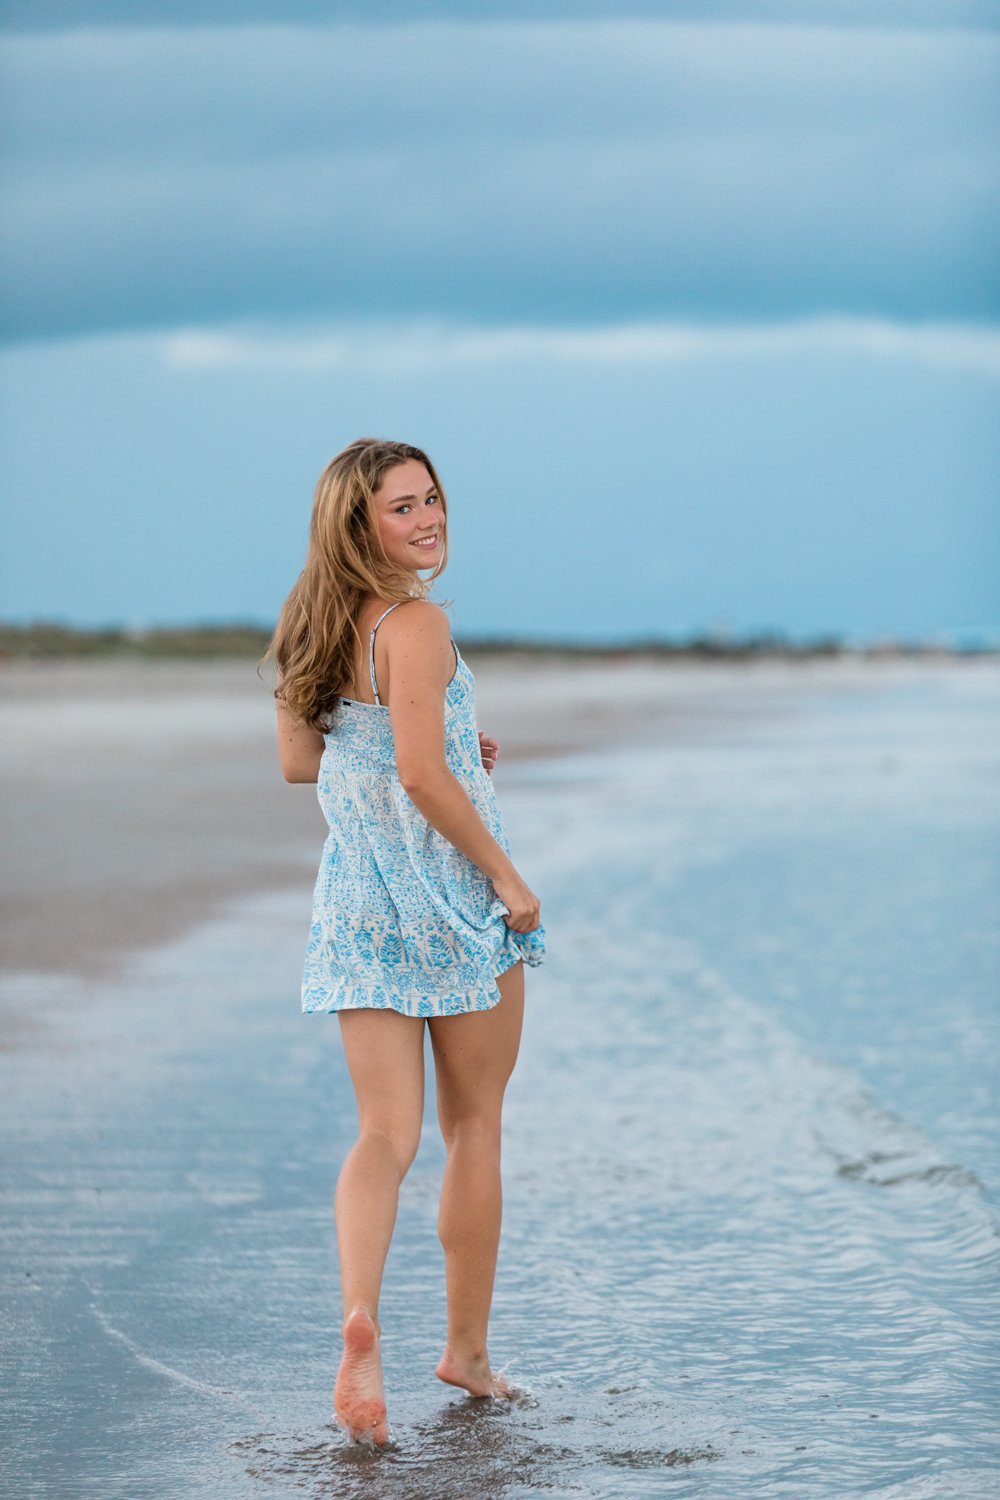 Senior girl running in the beach when storms are rolling in, Jacksonville FL